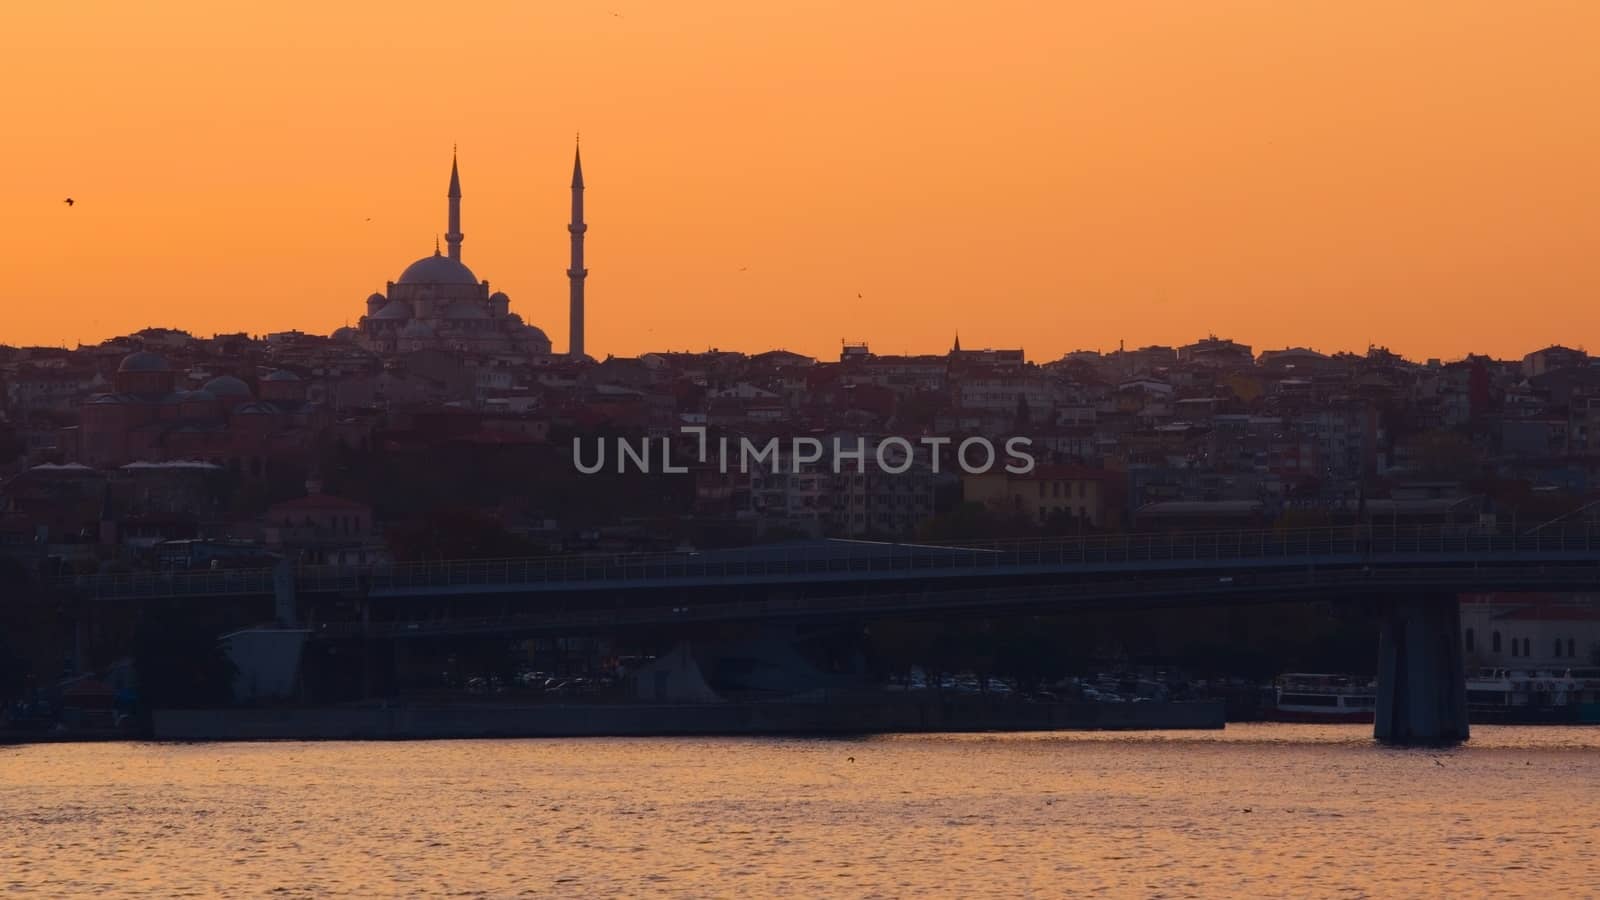 Hagia Sophia, the most important tourist attraction of Istanbul, Turkey, silhouetted against the ochre sunset sky from across the Bosphorus. by hernan_hyper